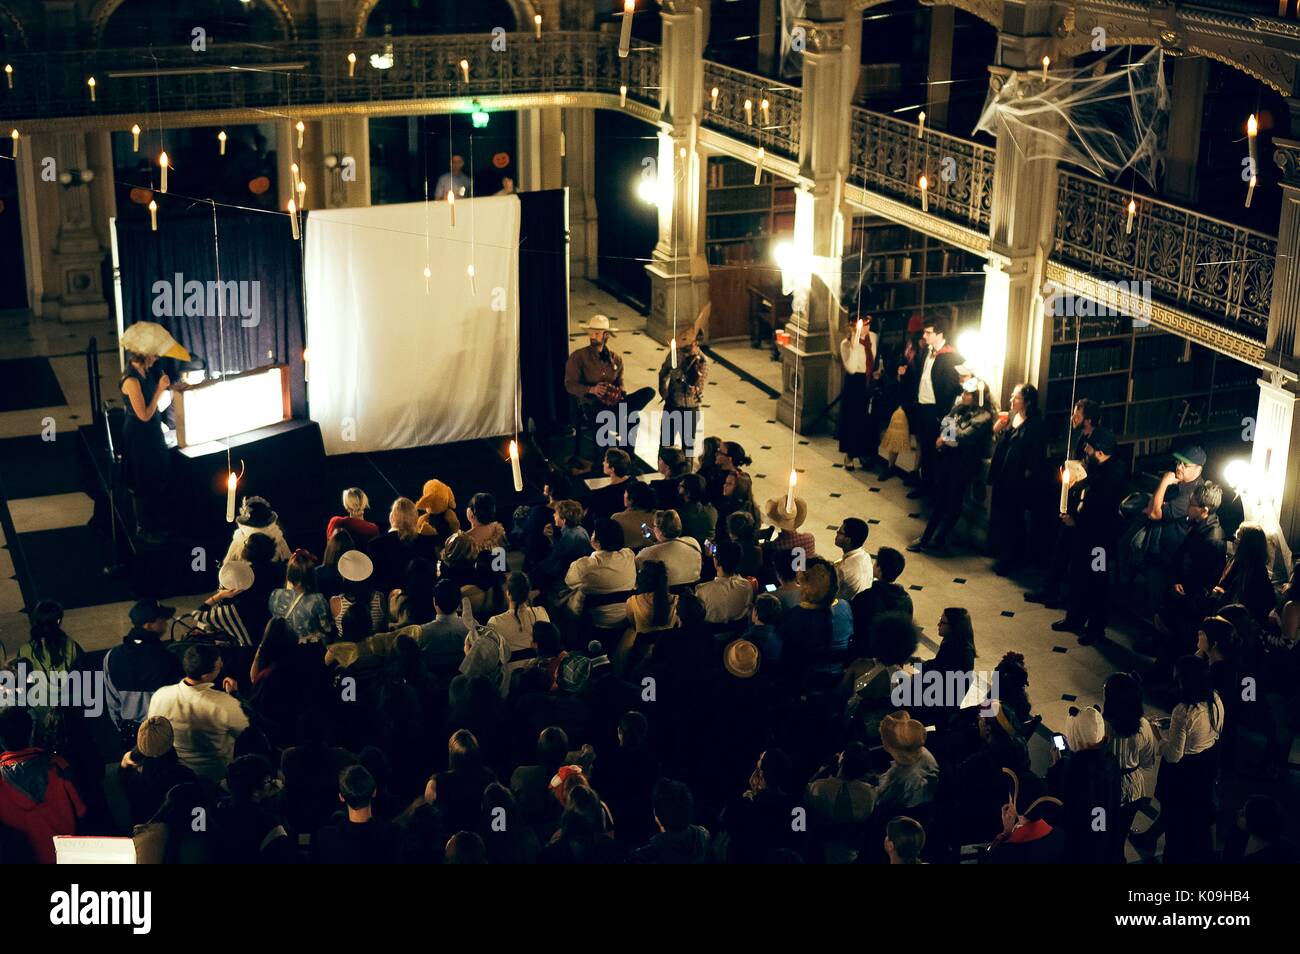 View from an upper level of the Peabody Library of the audience, the stage, the musicians, and shadow puppet performers, during Halloween at Johns Hopkins University's George Peabody Library, 2015. Courtesy Eric Chen. Stock Photo